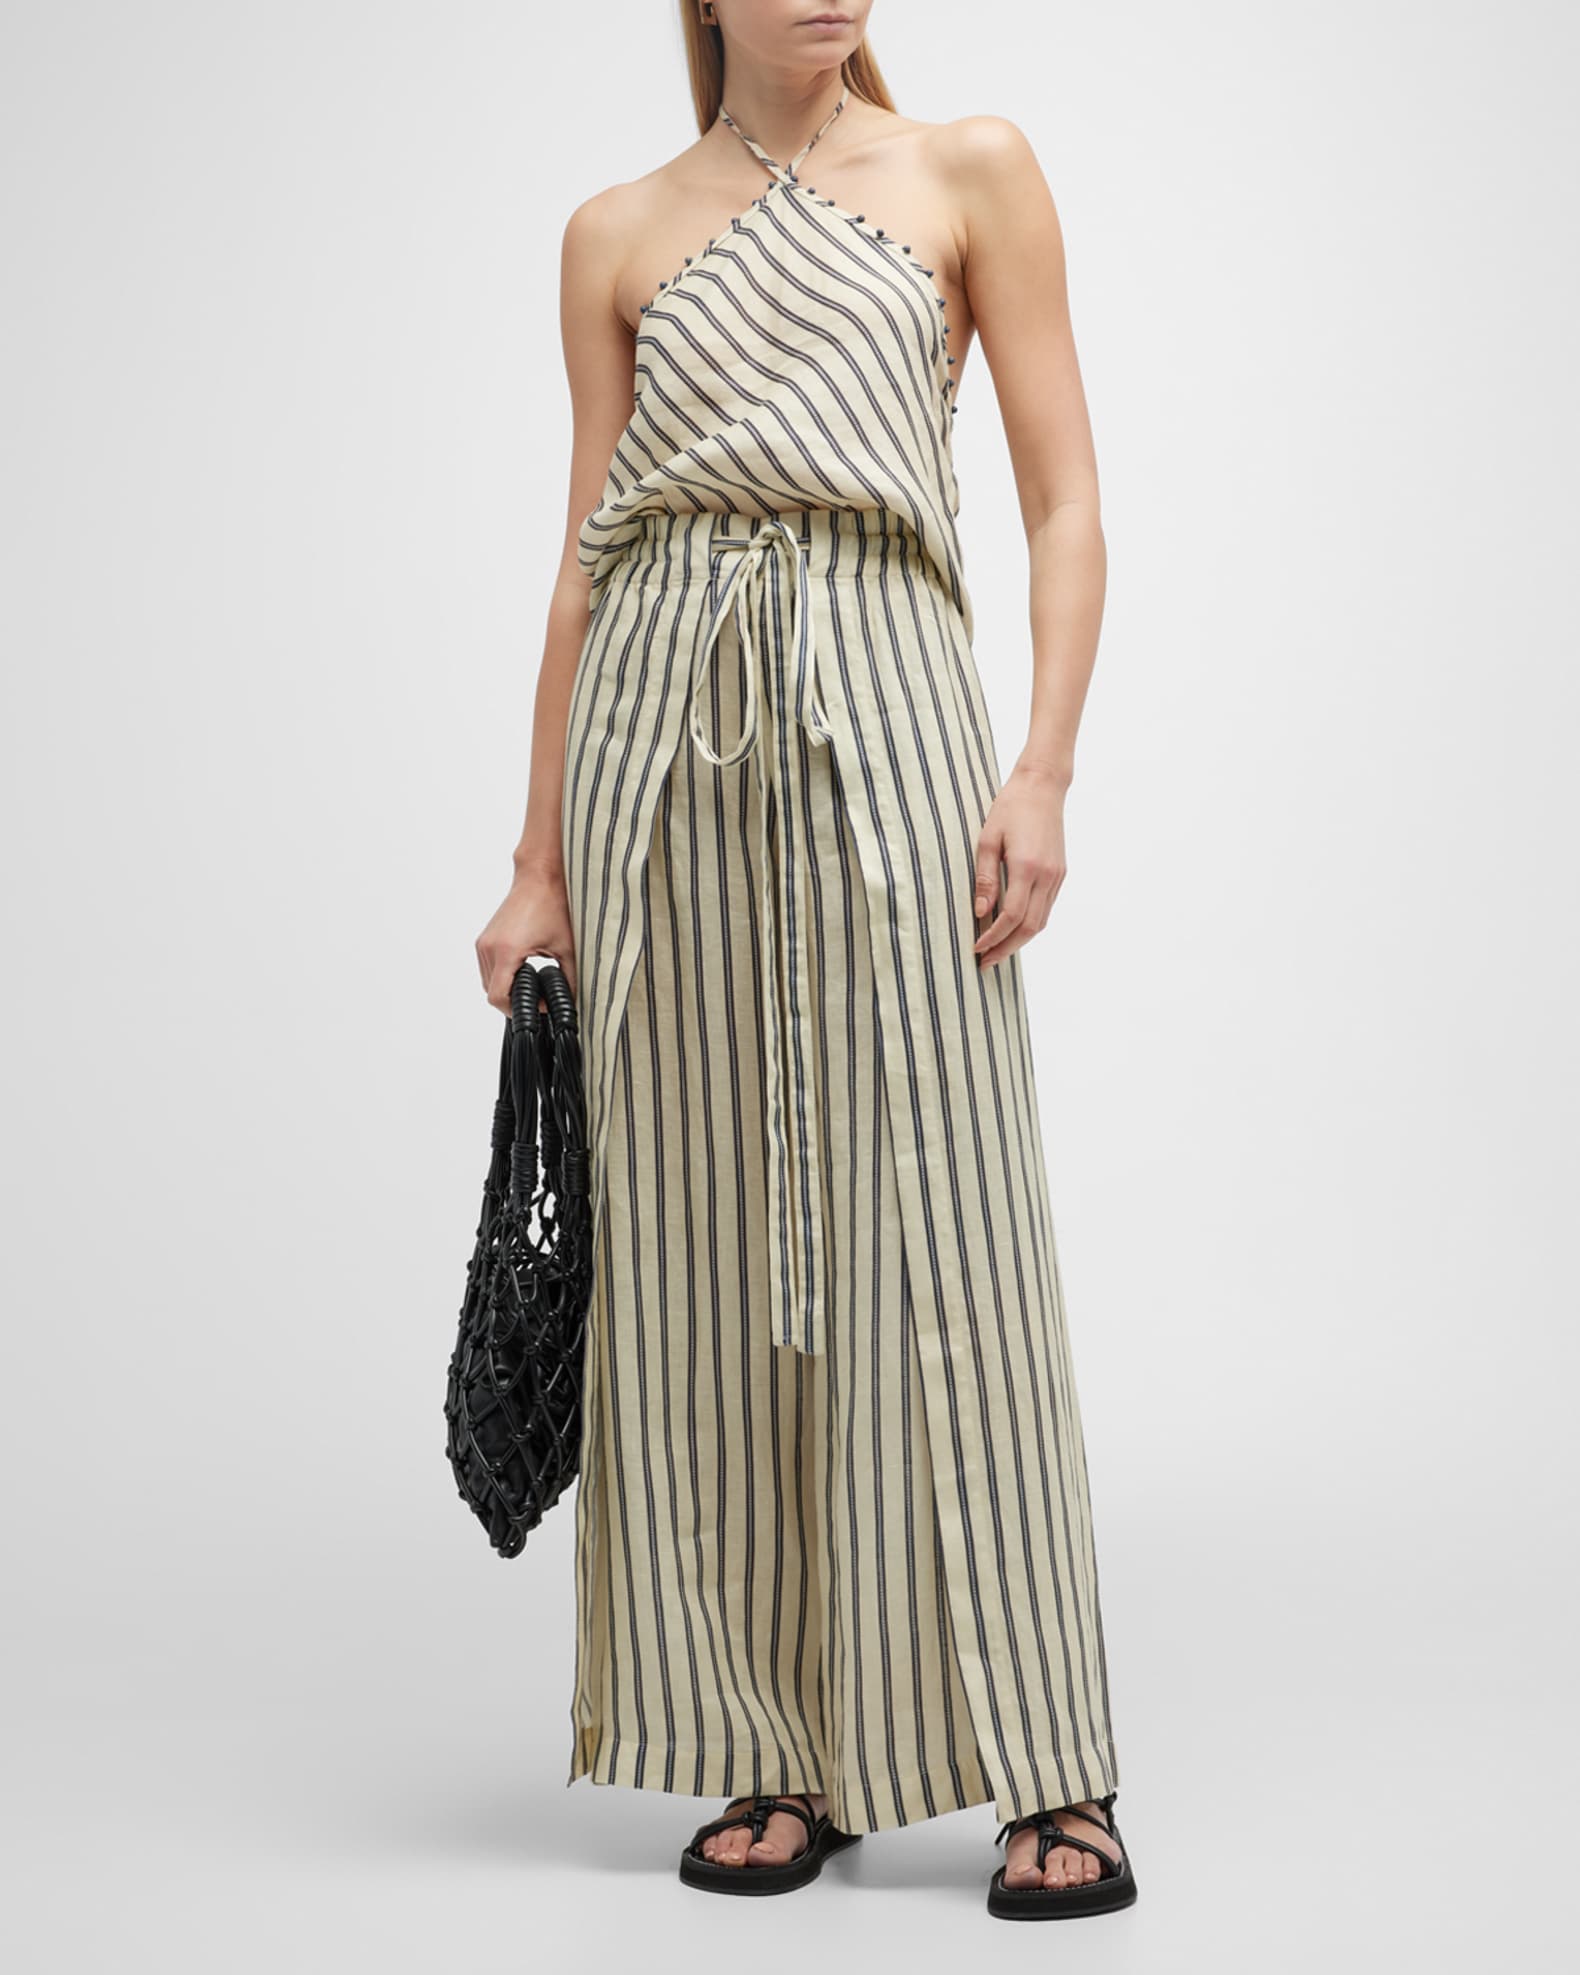 Striped Linen Collection | Neiman Marcus